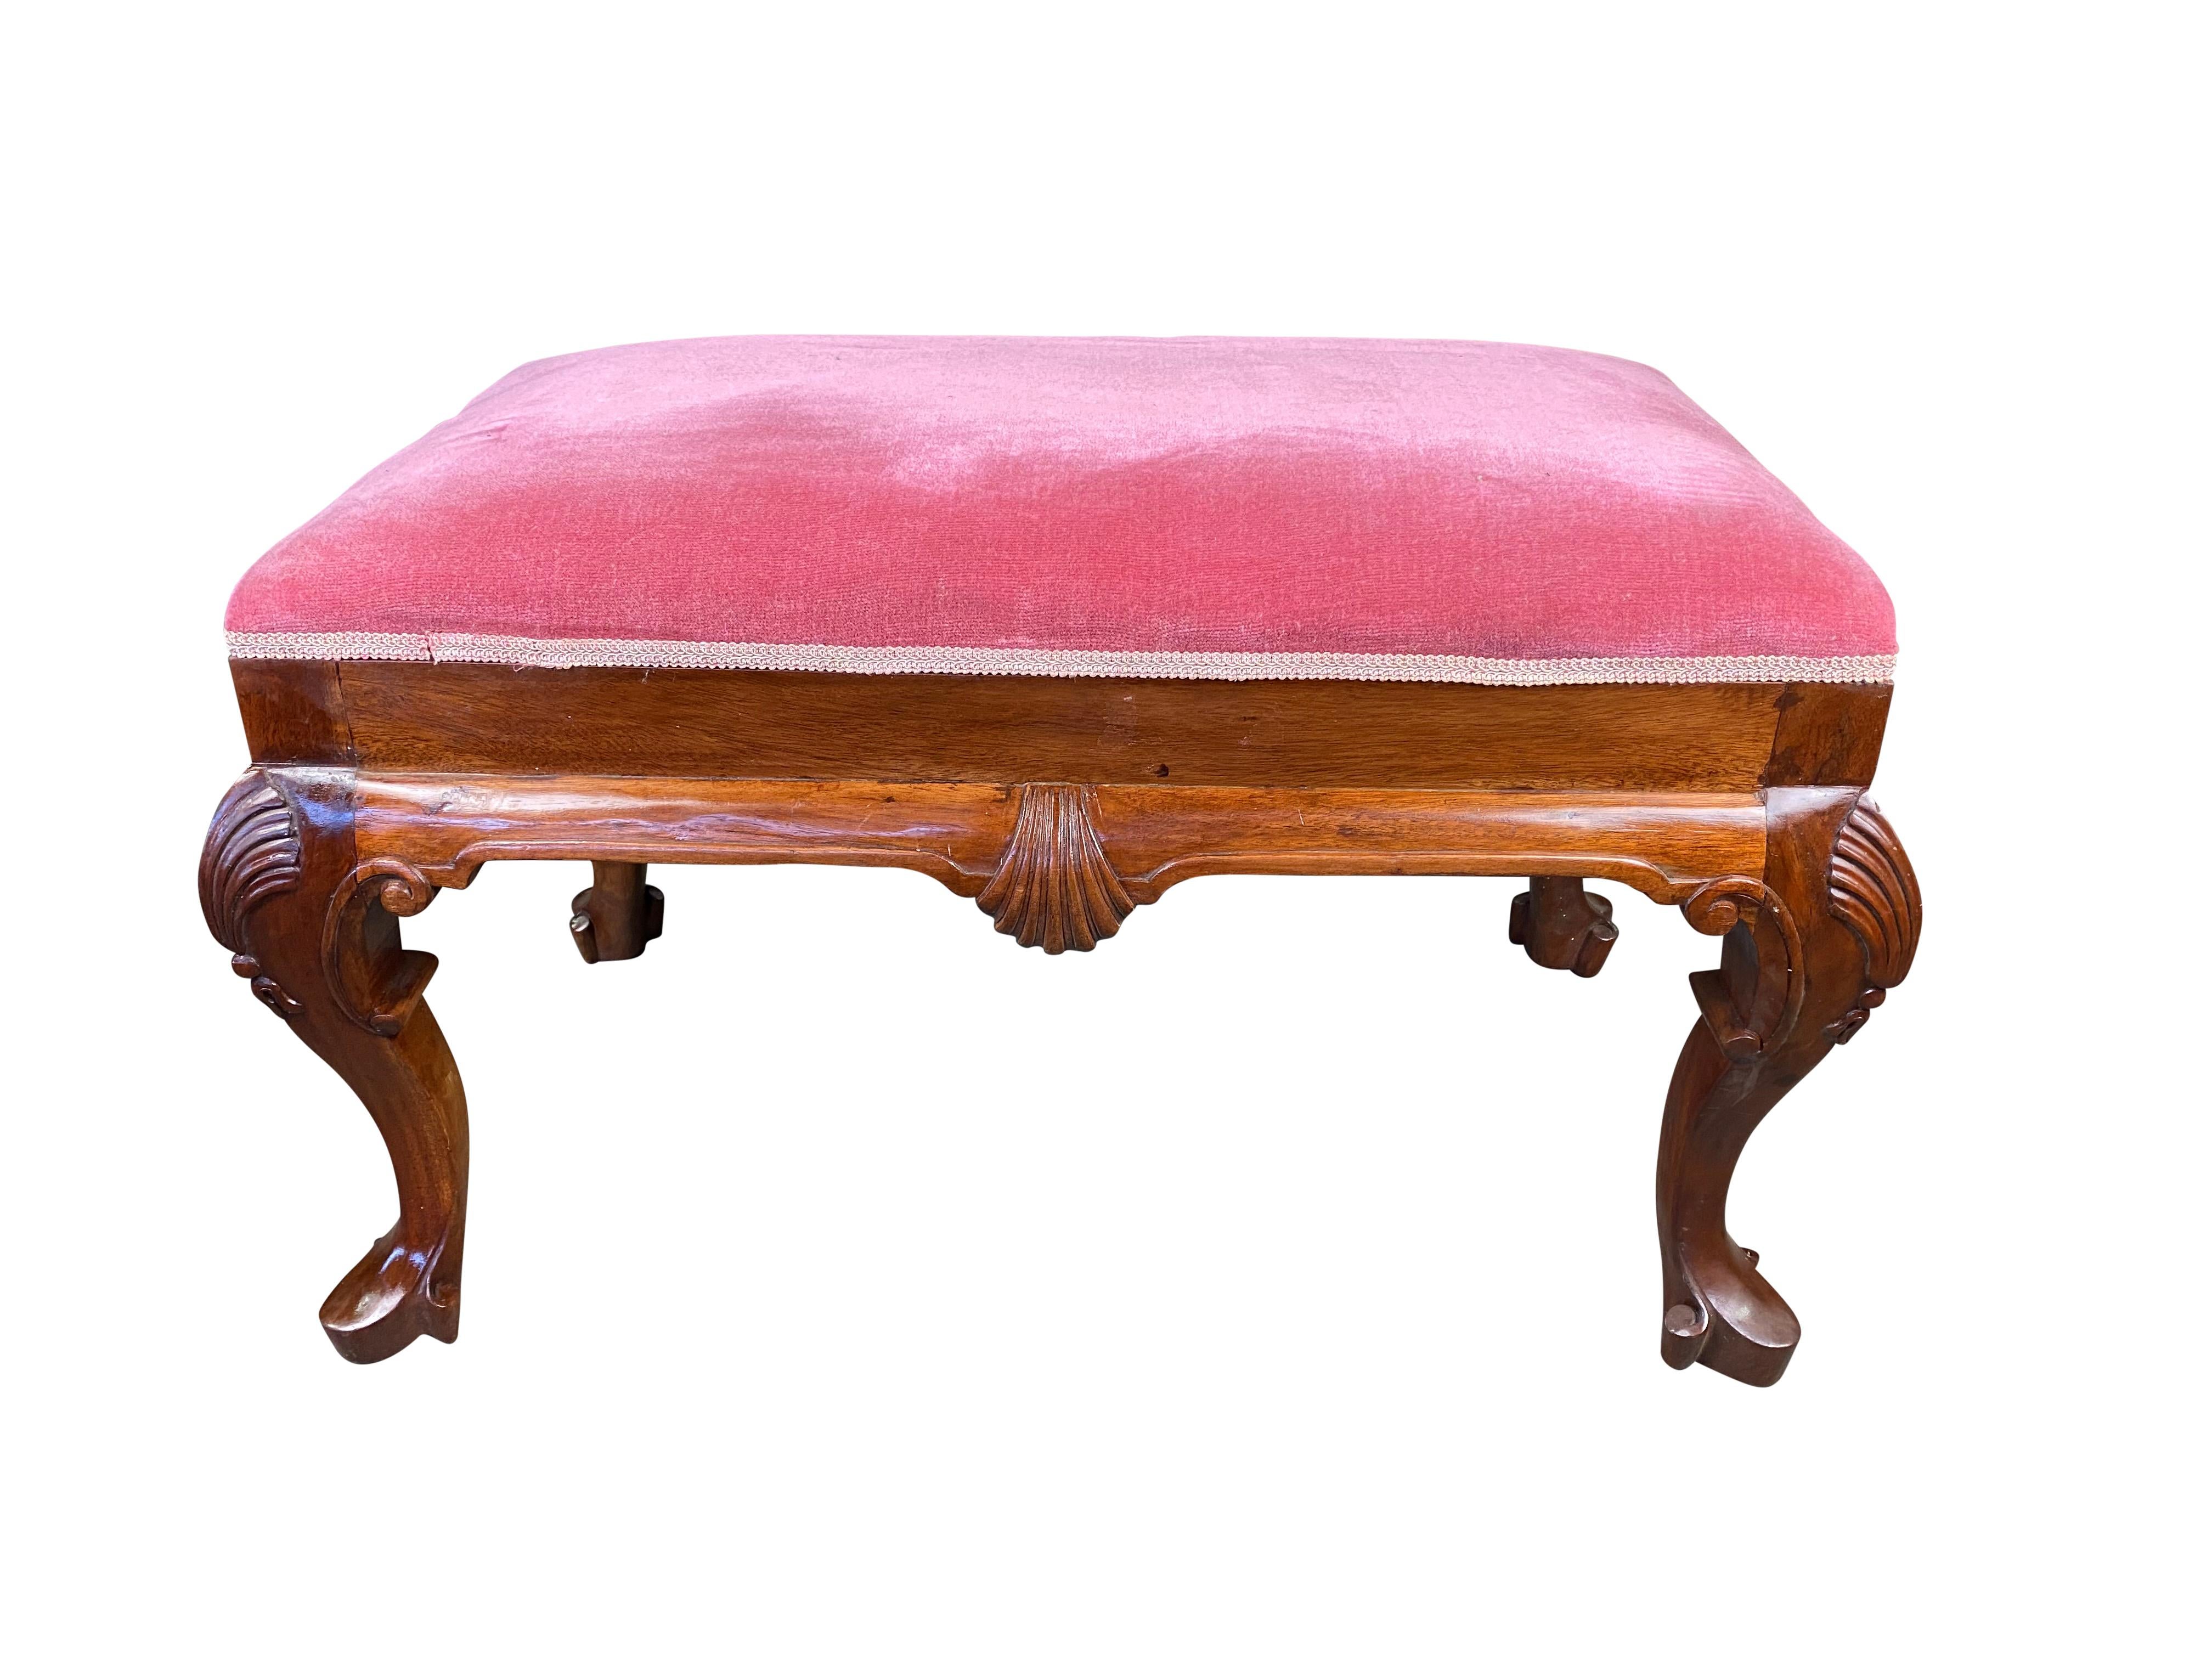 This gorgeous 20th century powdered pink, Queen Ann stool would fit perfectly in any rustic, wooden themed room next to a side table, or perhaps even under a grand piano. 

Dimensions (cm):
42 H, 72 W, 38 D.